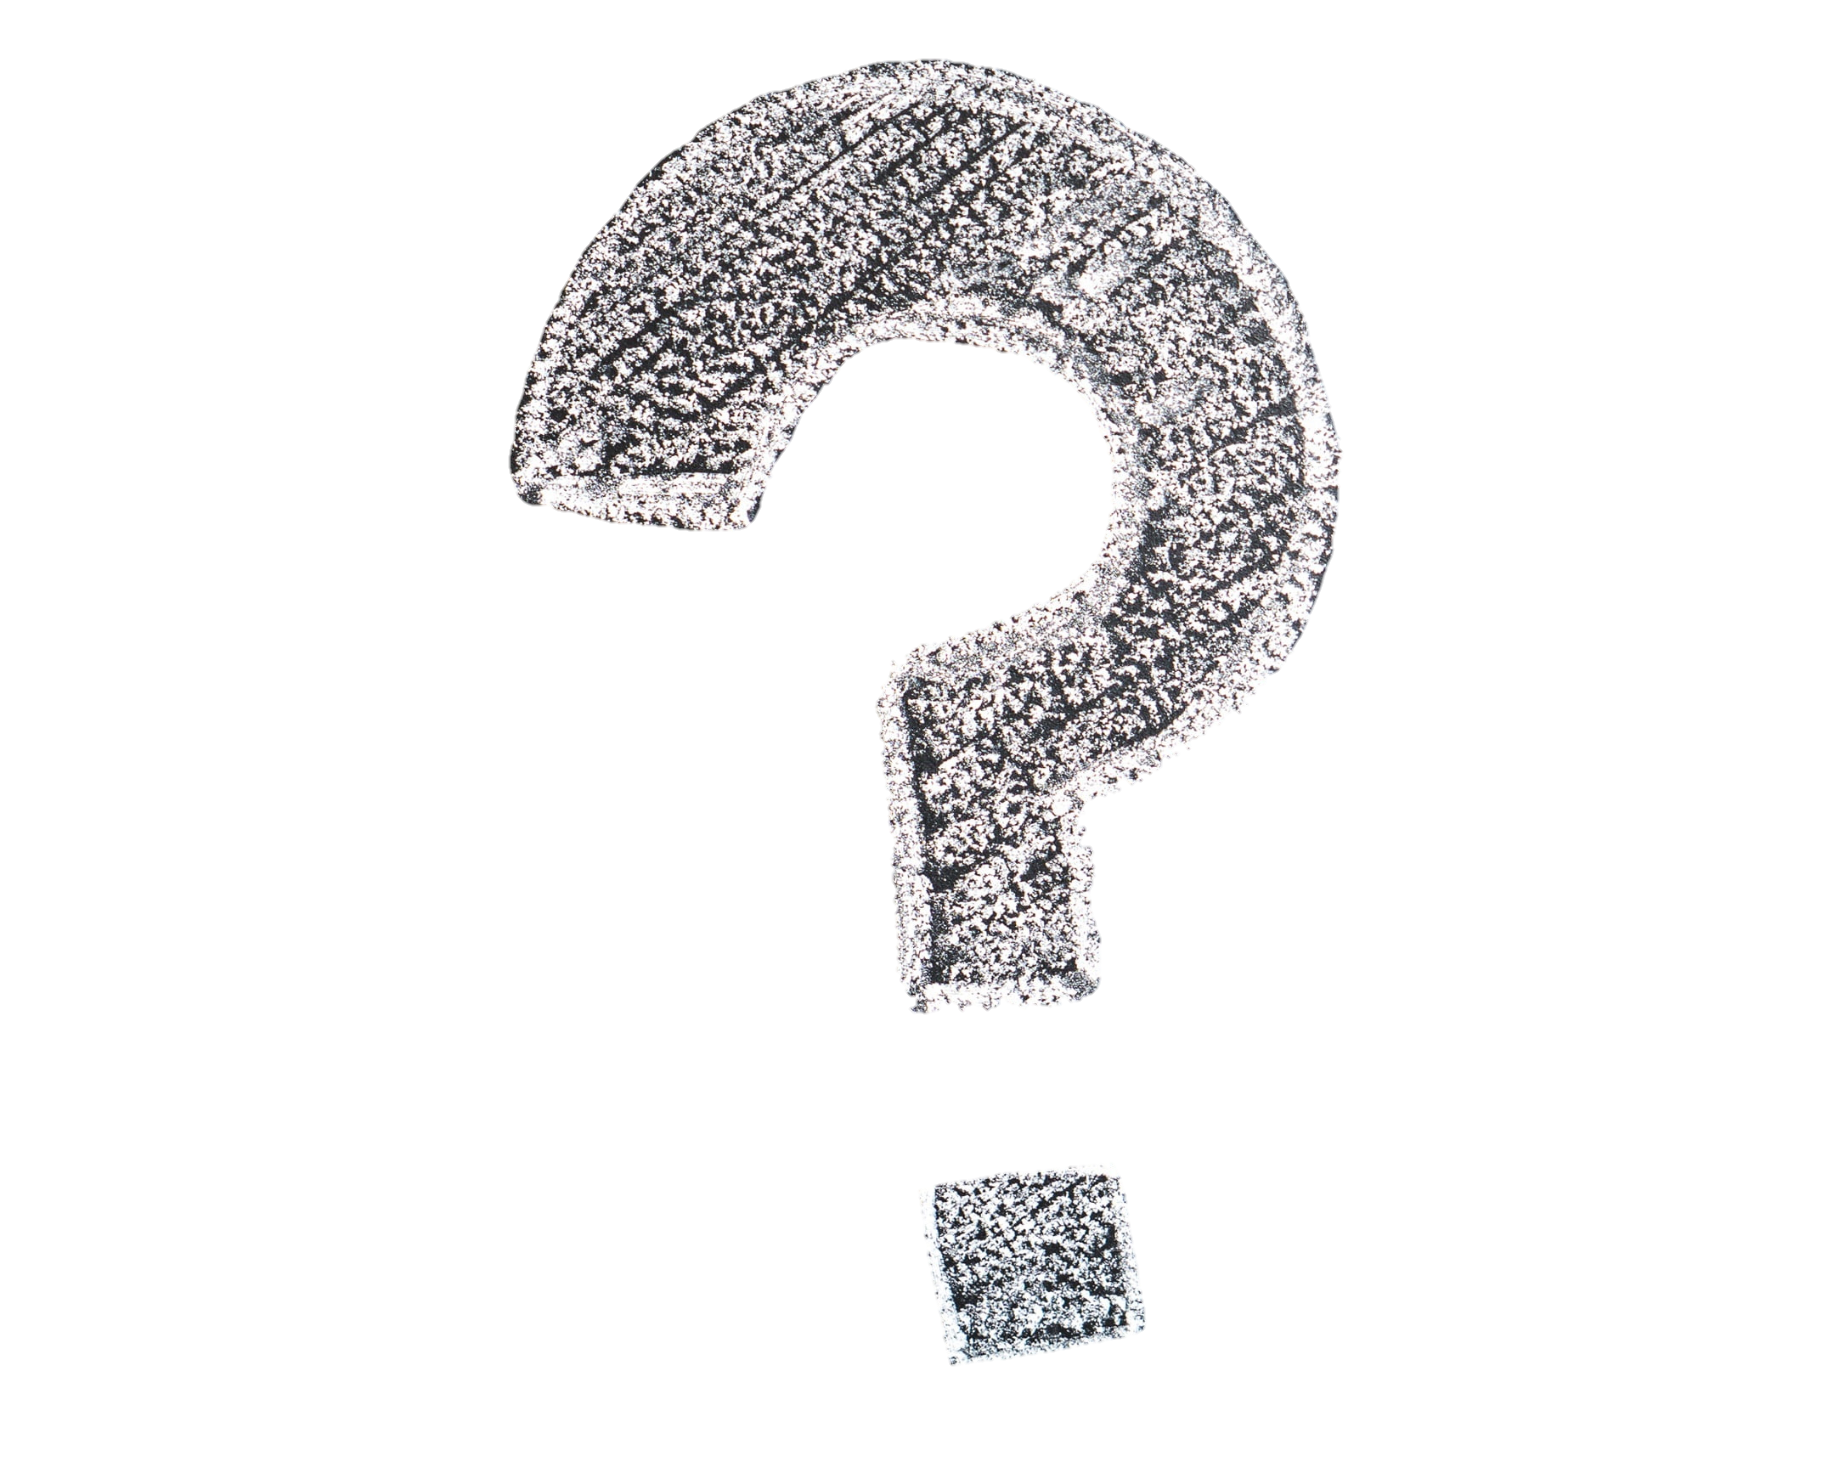 question-mark-png-from-pngfre-11-2